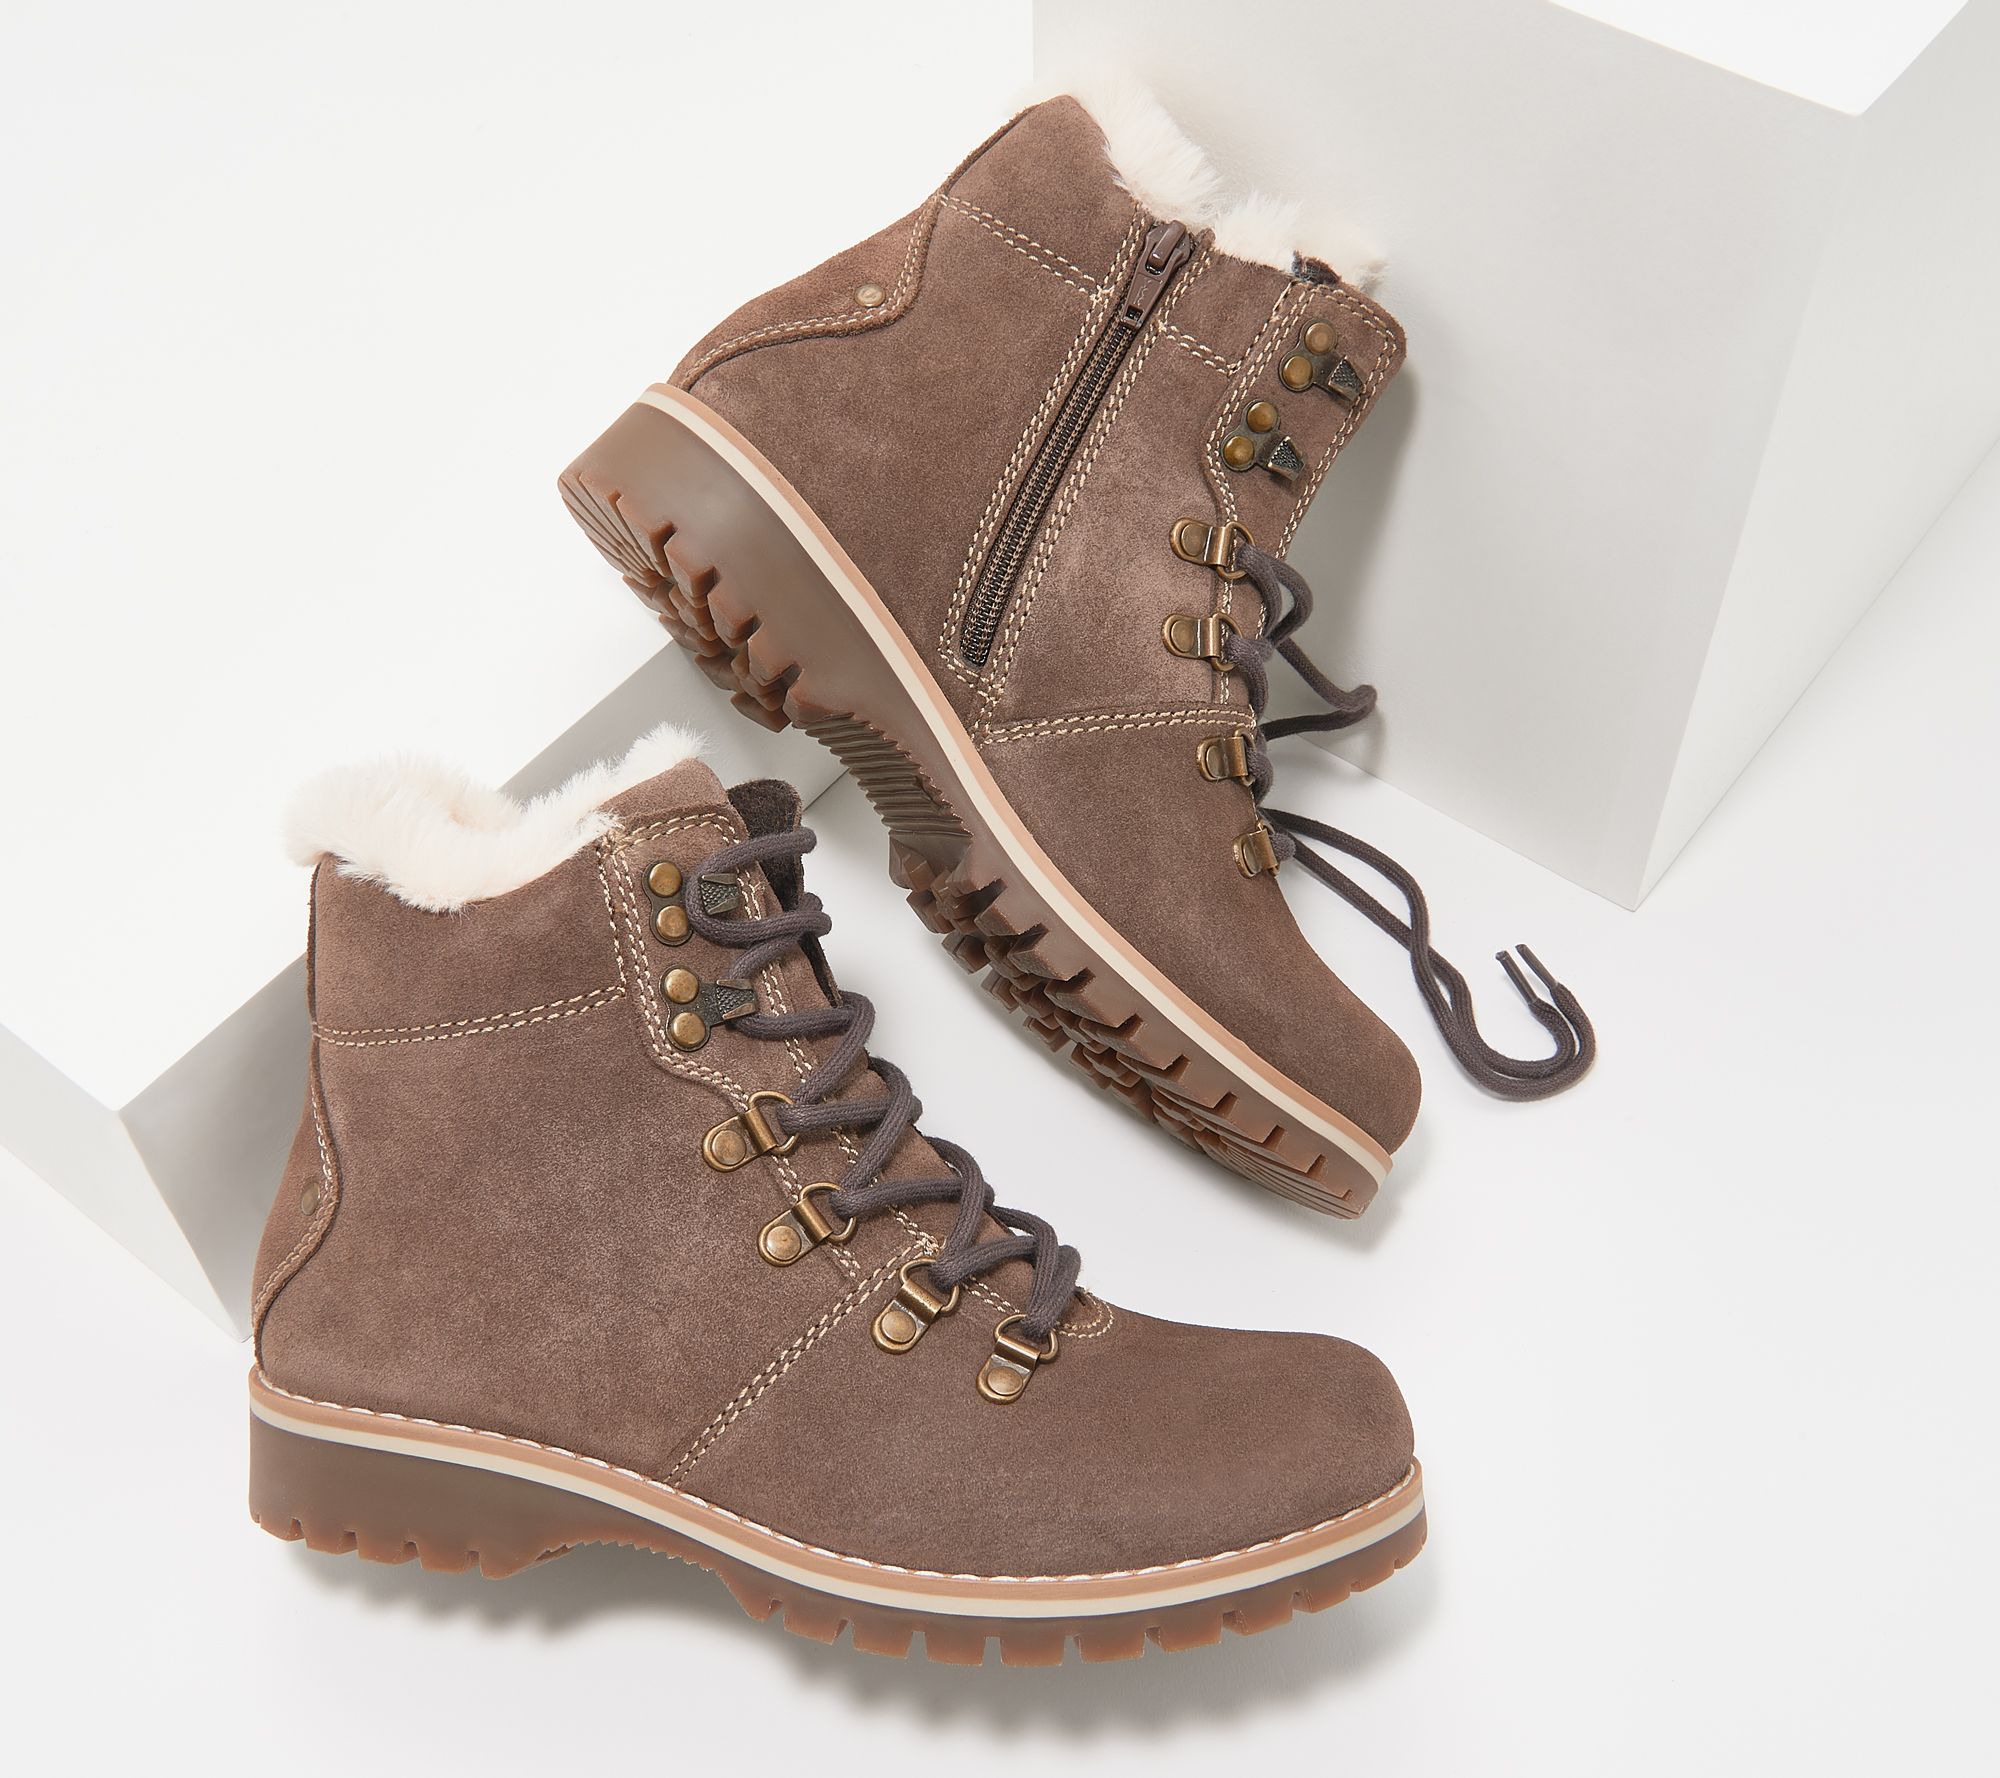 Earth Water Resistant Lace-Up Boot with Faux Fur - Ranger Acadia - QVC.com